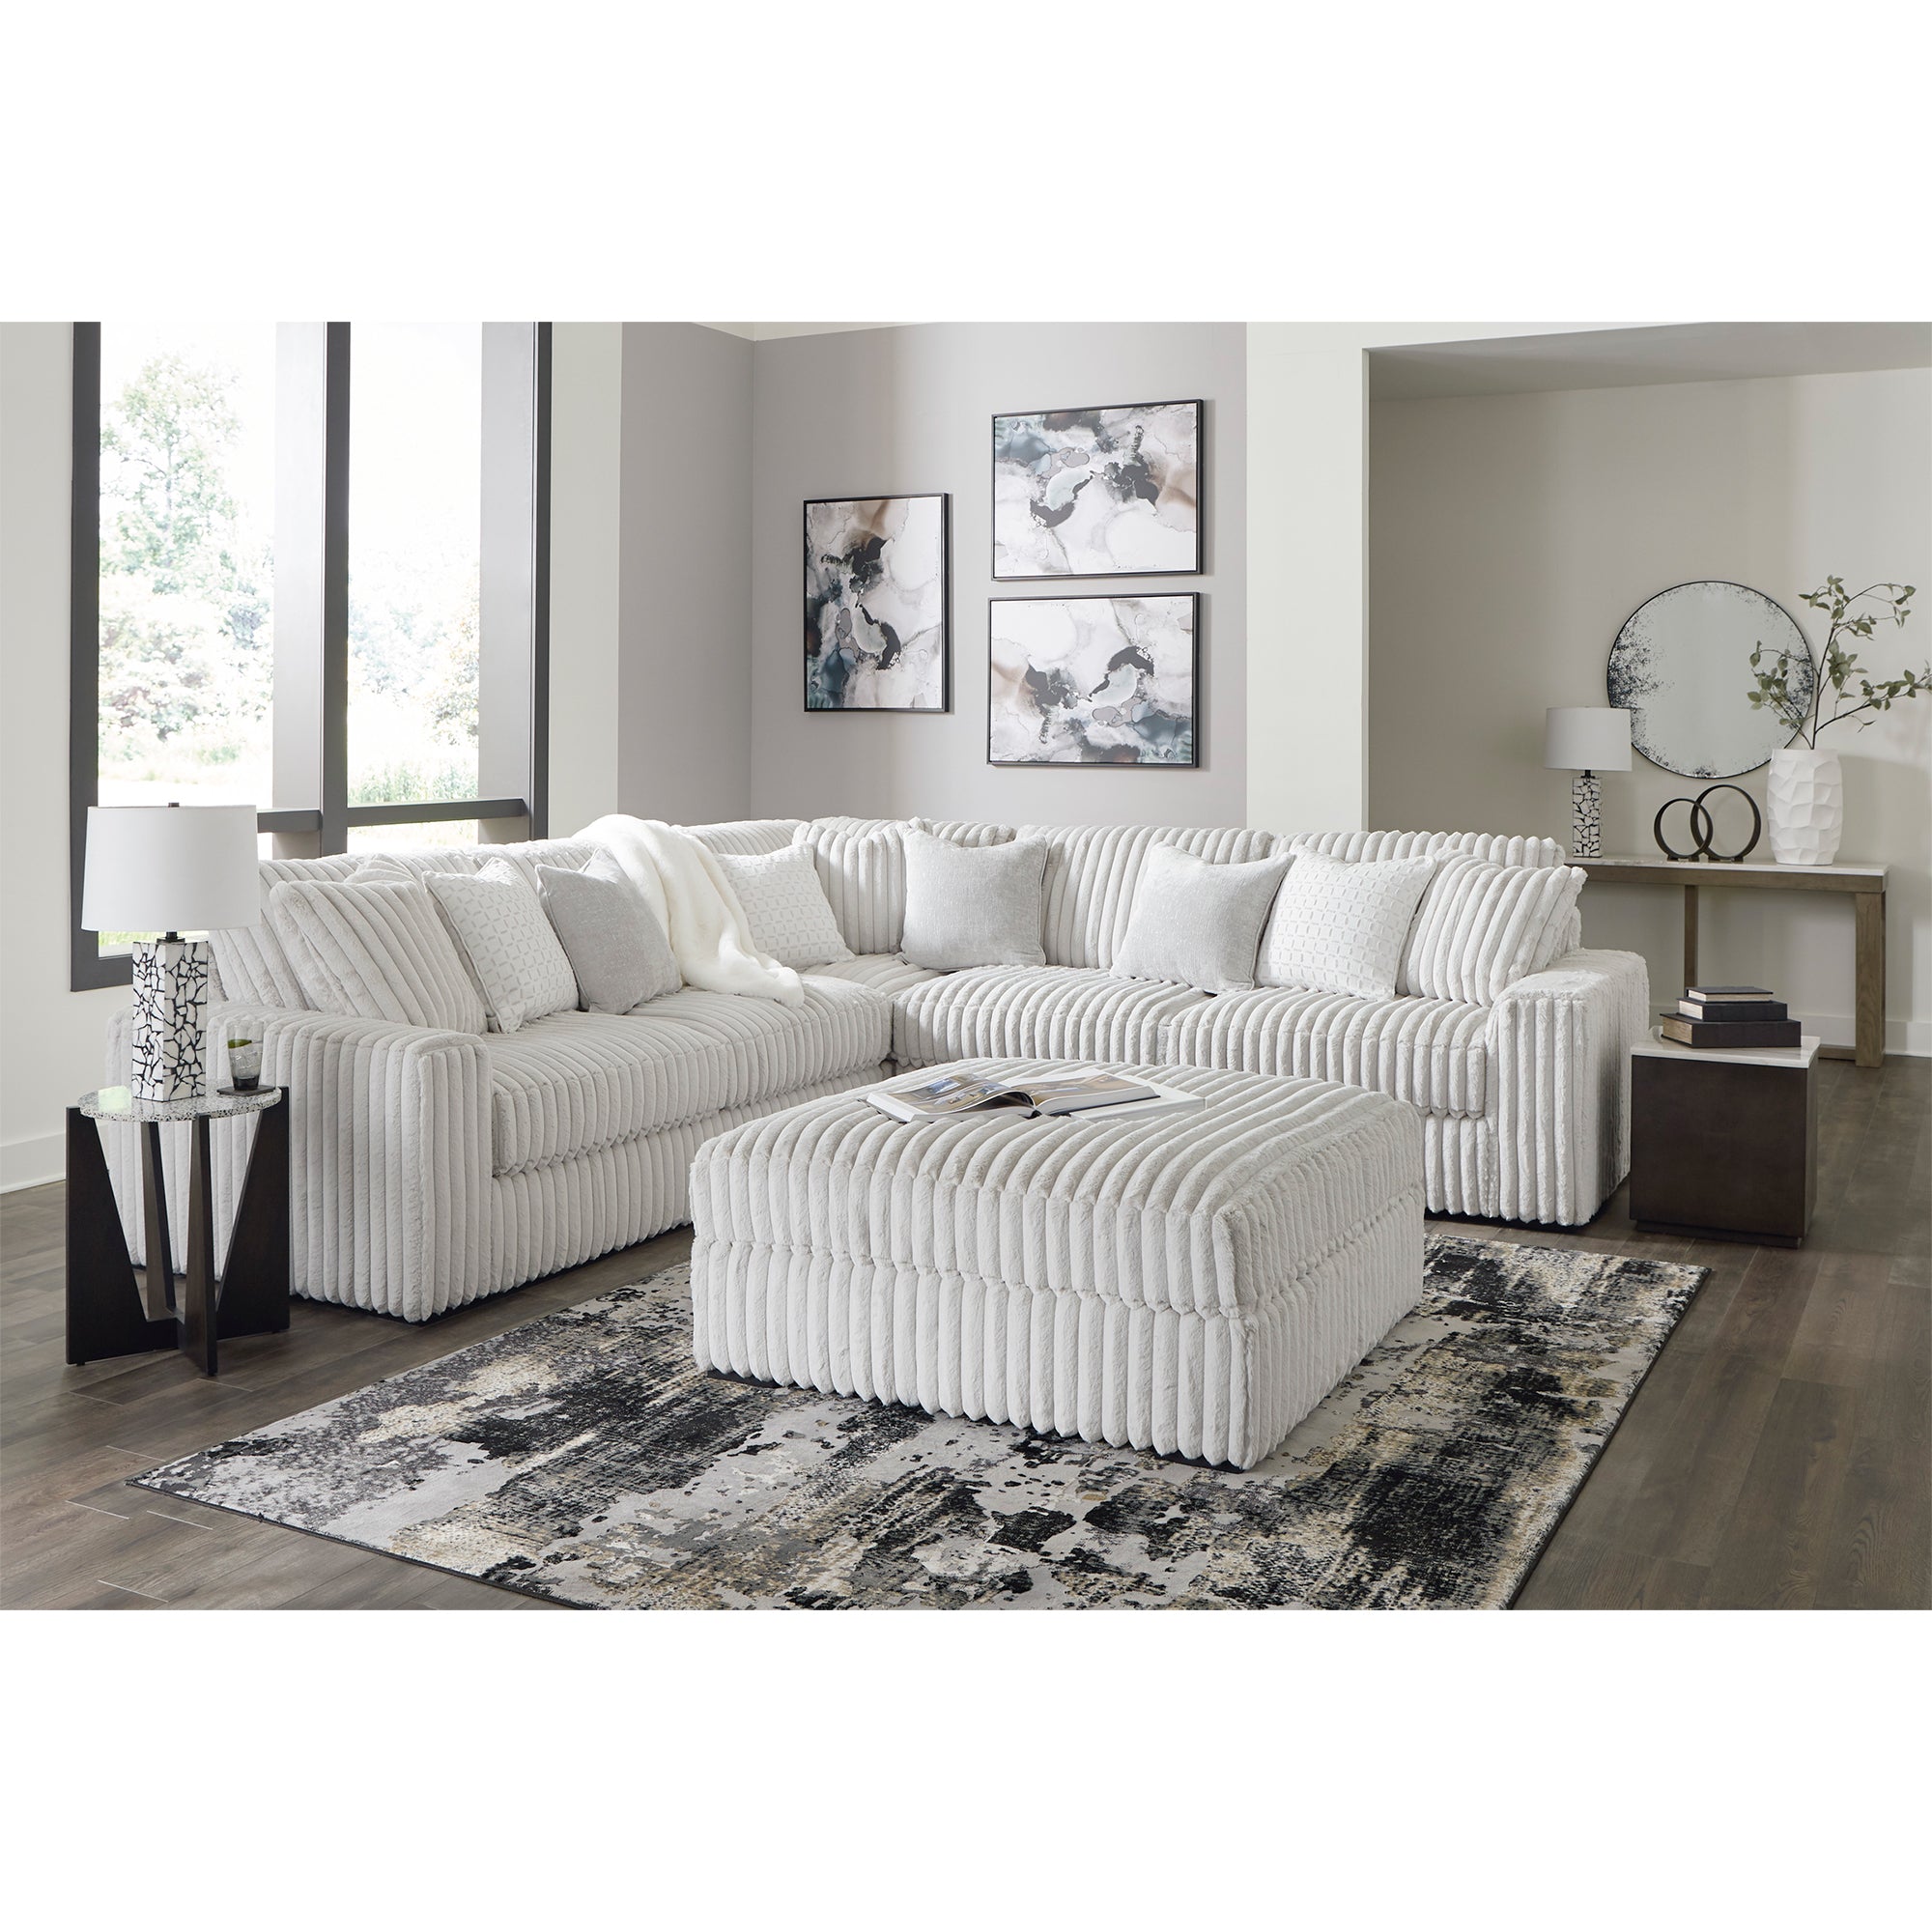 Contemporary Stupendous Sectional with polyester upholstery and faux wood finish feet, combines comfort with modern design